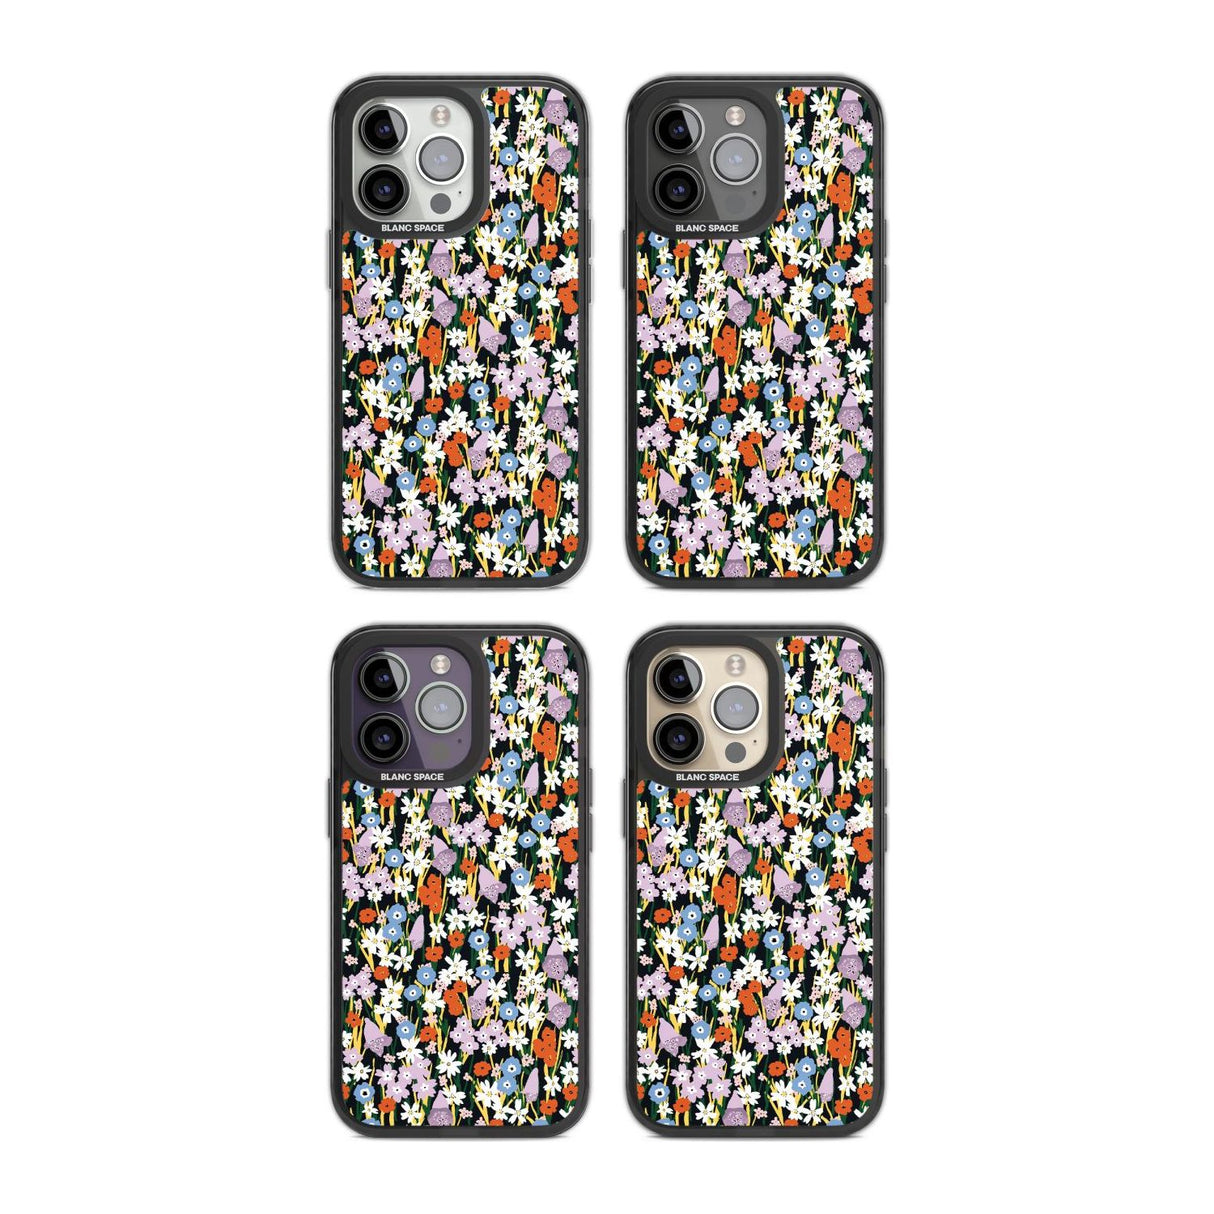 Energetic Floral Mix: Solid Phone Case iPhone 15 Pro Max / Black Impact Case,iPhone 15 Plus / Black Impact Case,iPhone 15 Pro / Black Impact Case,iPhone 15 / Black Impact Case,iPhone 15 Pro Max / Impact Case,iPhone 15 Plus / Impact Case,iPhone 15 Pro / Impact Case,iPhone 15 / Impact Case,iPhone 15 Pro Max / Magsafe Black Impact Case,iPhone 15 Plus / Magsafe Black Impact Case,iPhone 15 Pro / Magsafe Black Impact Case,iPhone 15 / Magsafe Black Impact Case,iPhone 14 Pro Max / Black Impact Case,iPhone 14 Plus /